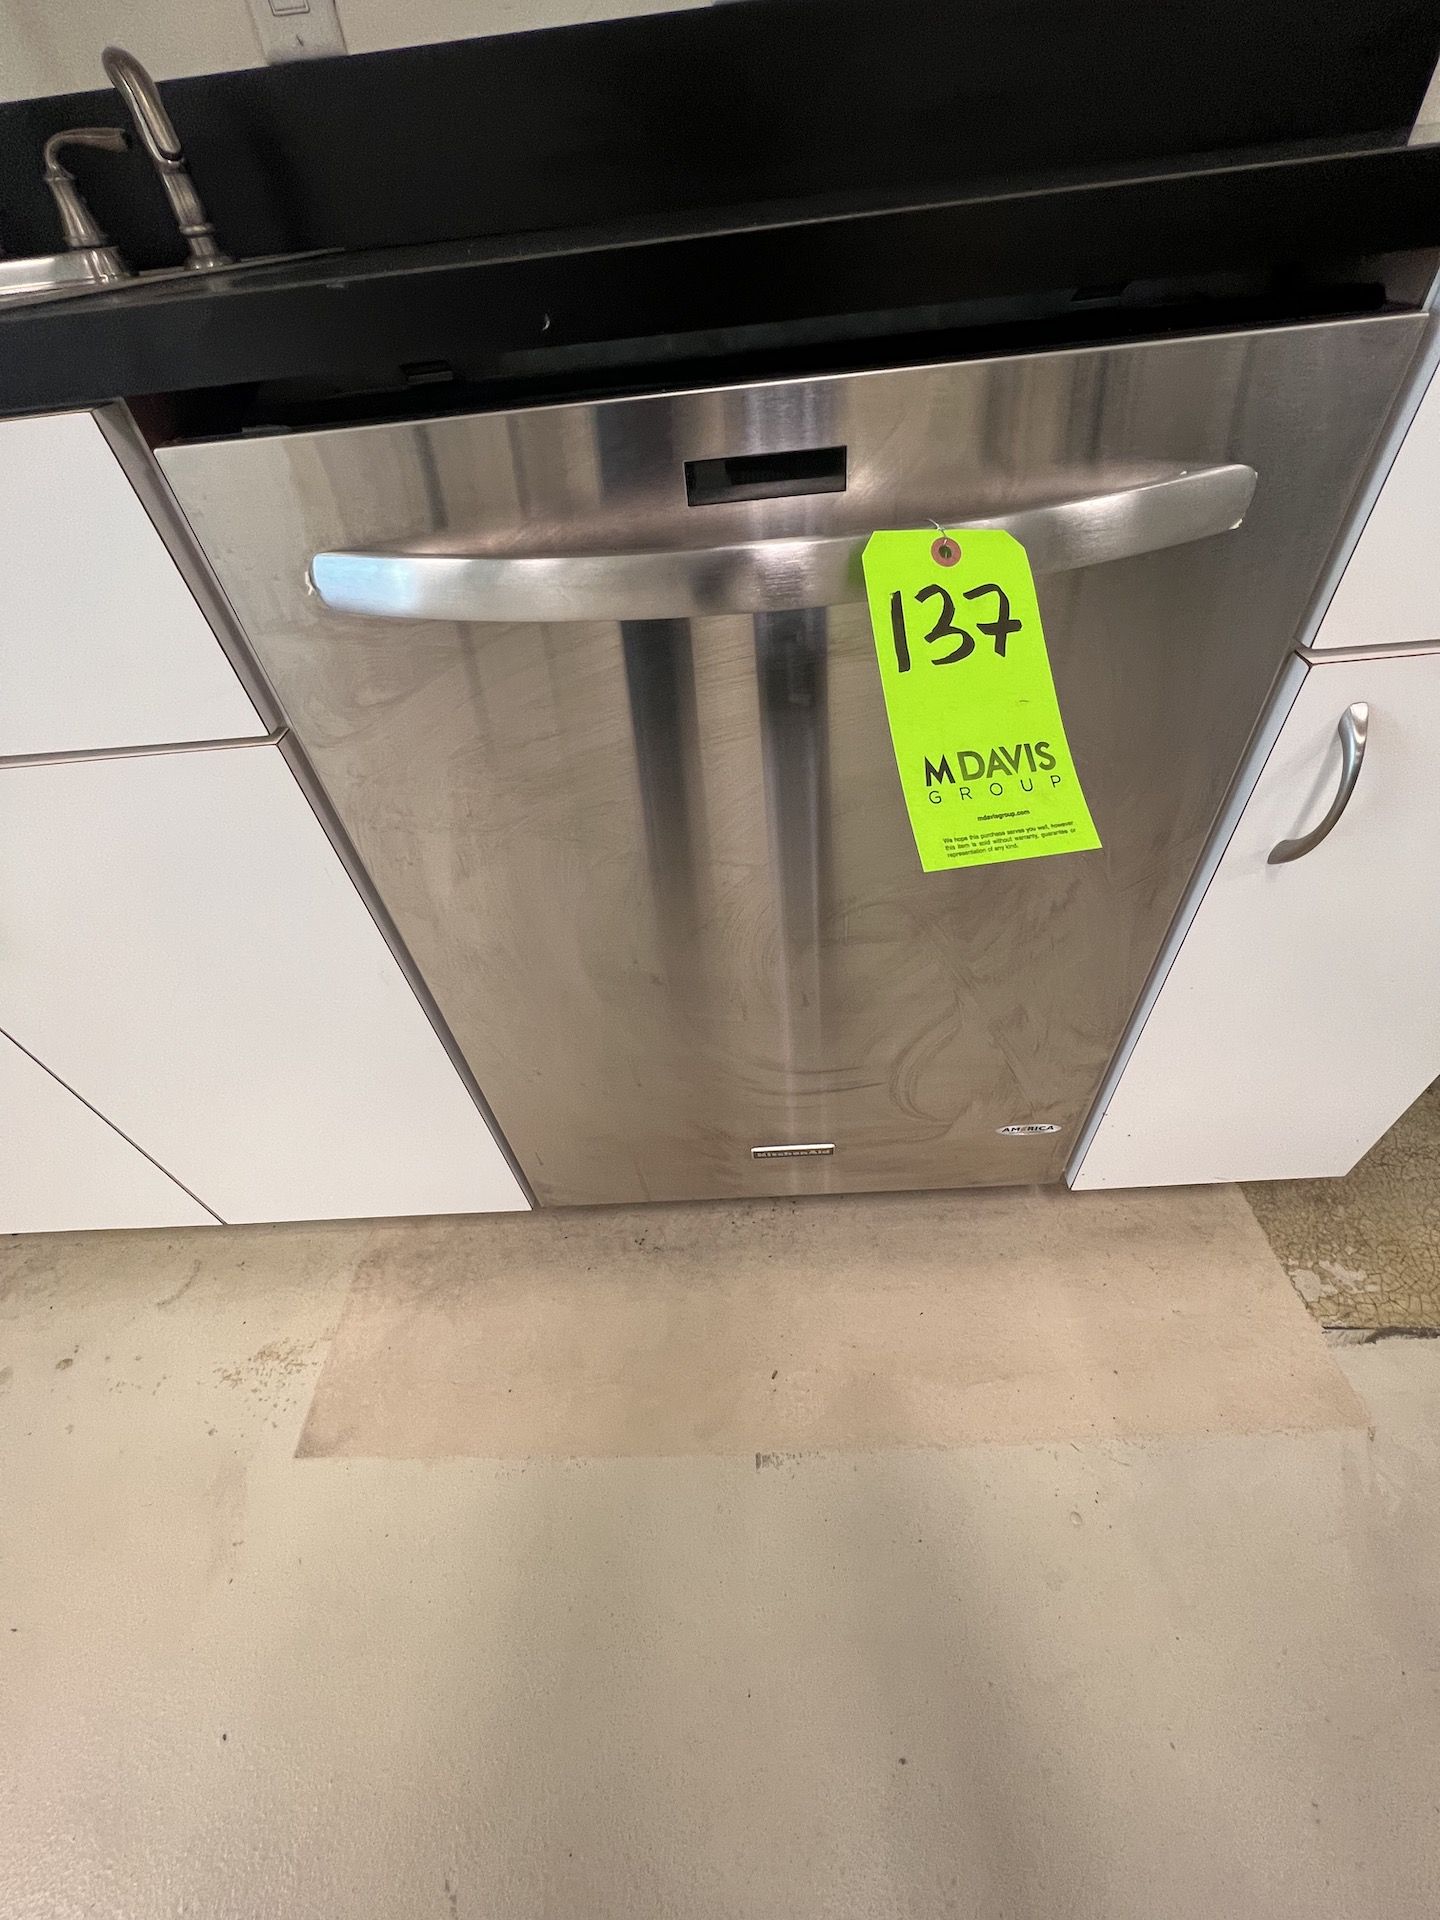 KITCHENAID S/S DISHWASHER (RIGGING & SIMPLE LOADING FEE $50.00) (NOTE: DOES NOT INCLUDE SKIDDING